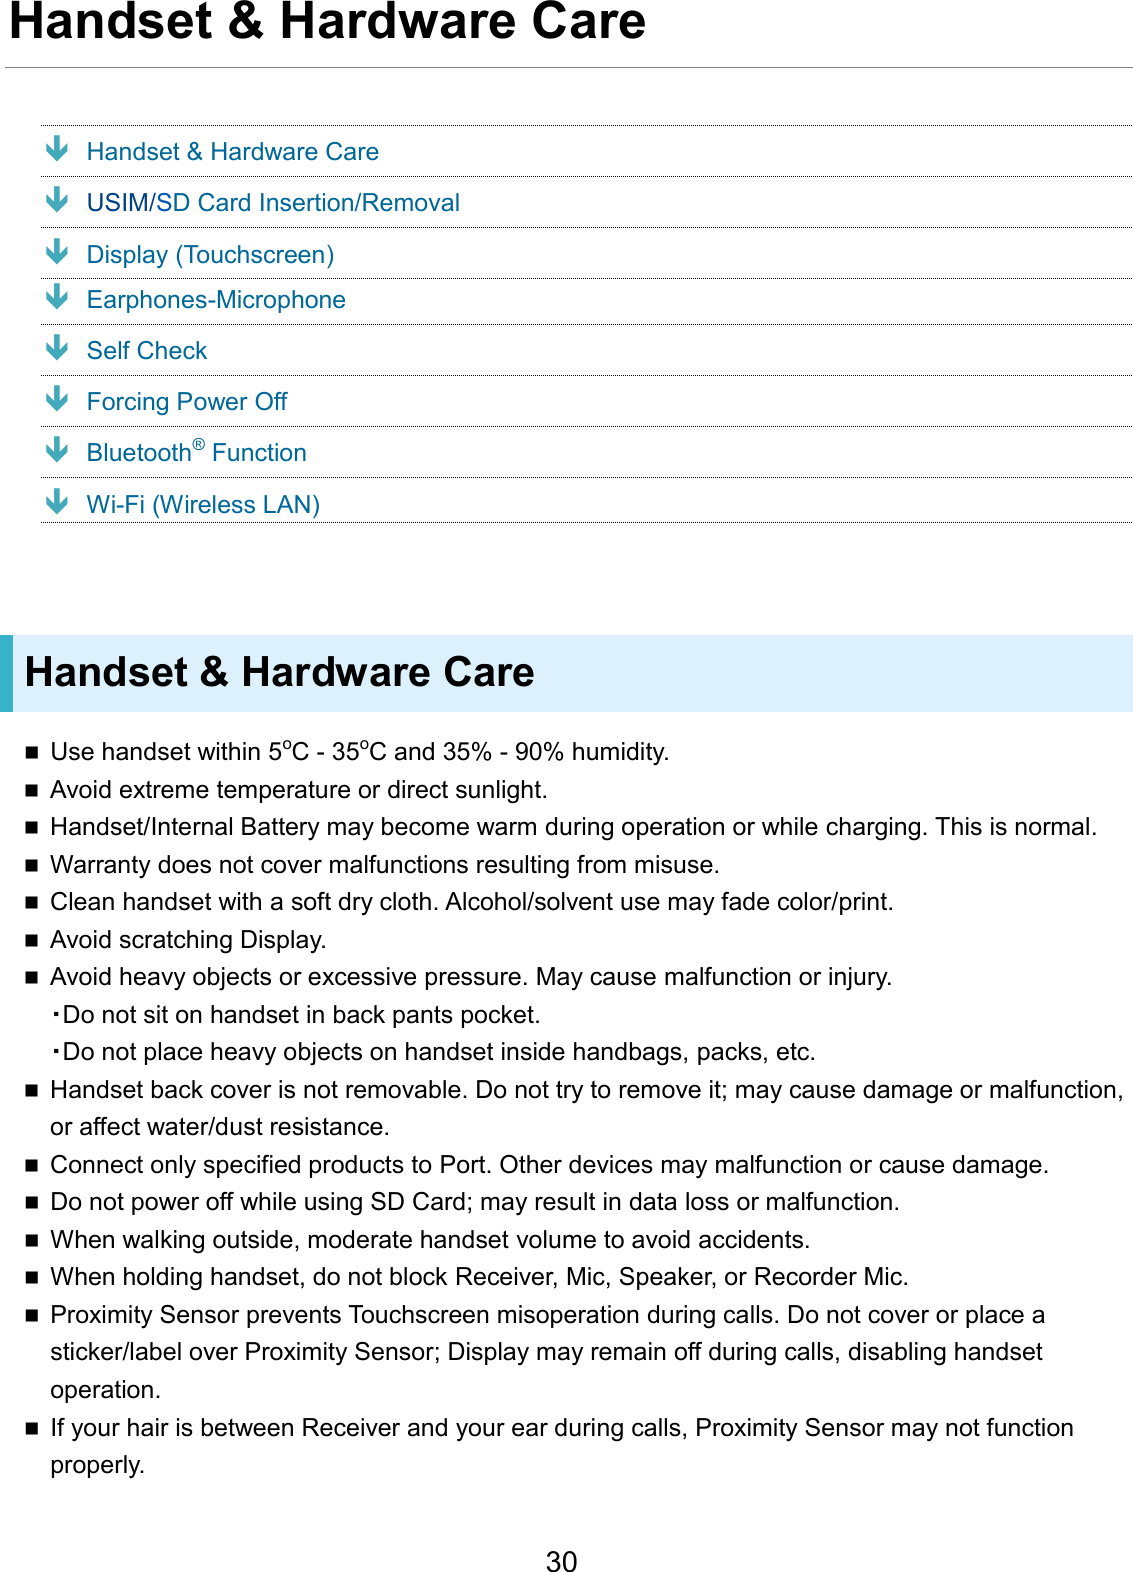 Handset &amp; Hardware Care Handset &amp; Hardware Care USIM/SD Card Insertion/Removal Display (Touchscreen) Earphones-Microphone Self Check Forcing Power Off Bluetooth® Function Wi-Fi (Wireless LAN) Handset &amp; Hardware Care Use handset within 5oC - 35oC and 35% - 90% humidity.Avoid extreme temperature or direct sunlight.Handset/Internal Battery may become warm during operation or while charging. This is normal.Warranty does not cover malfunctions resulting from misuse.Clean handset with a soft dry cloth. Alcohol/solvent use may fade color/print.Avoid scratching Display.Avoid heavy objects or excessive pressure. May cause malfunction or injury.・Do not sit on handset in back pants pocket.・Do not place heavy objects on handset inside handbags, packs, etc.Handset back cover is not removable. Do not try to remove it; may cause damage or malfunction,or affect water/dust resistance.Connect only specified products to Port. Other devices may malfunction or cause damage.Do not power off while using SD Card; may result in data loss or malfunction.When walking outside, moderate handset volume to avoid accidents.When holding handset, do not block Receiver, Mic, Speaker, or Recorder Mic.Proximity Sensor prevents Touchscreen misoperation during calls. Do not cover or place asticker/label over Proximity Sensor; Display may remain off during calls, disabling handsetoperation.If your hair is between Receiver and your ear during calls, Proximity Sensor may not functionproperly.30